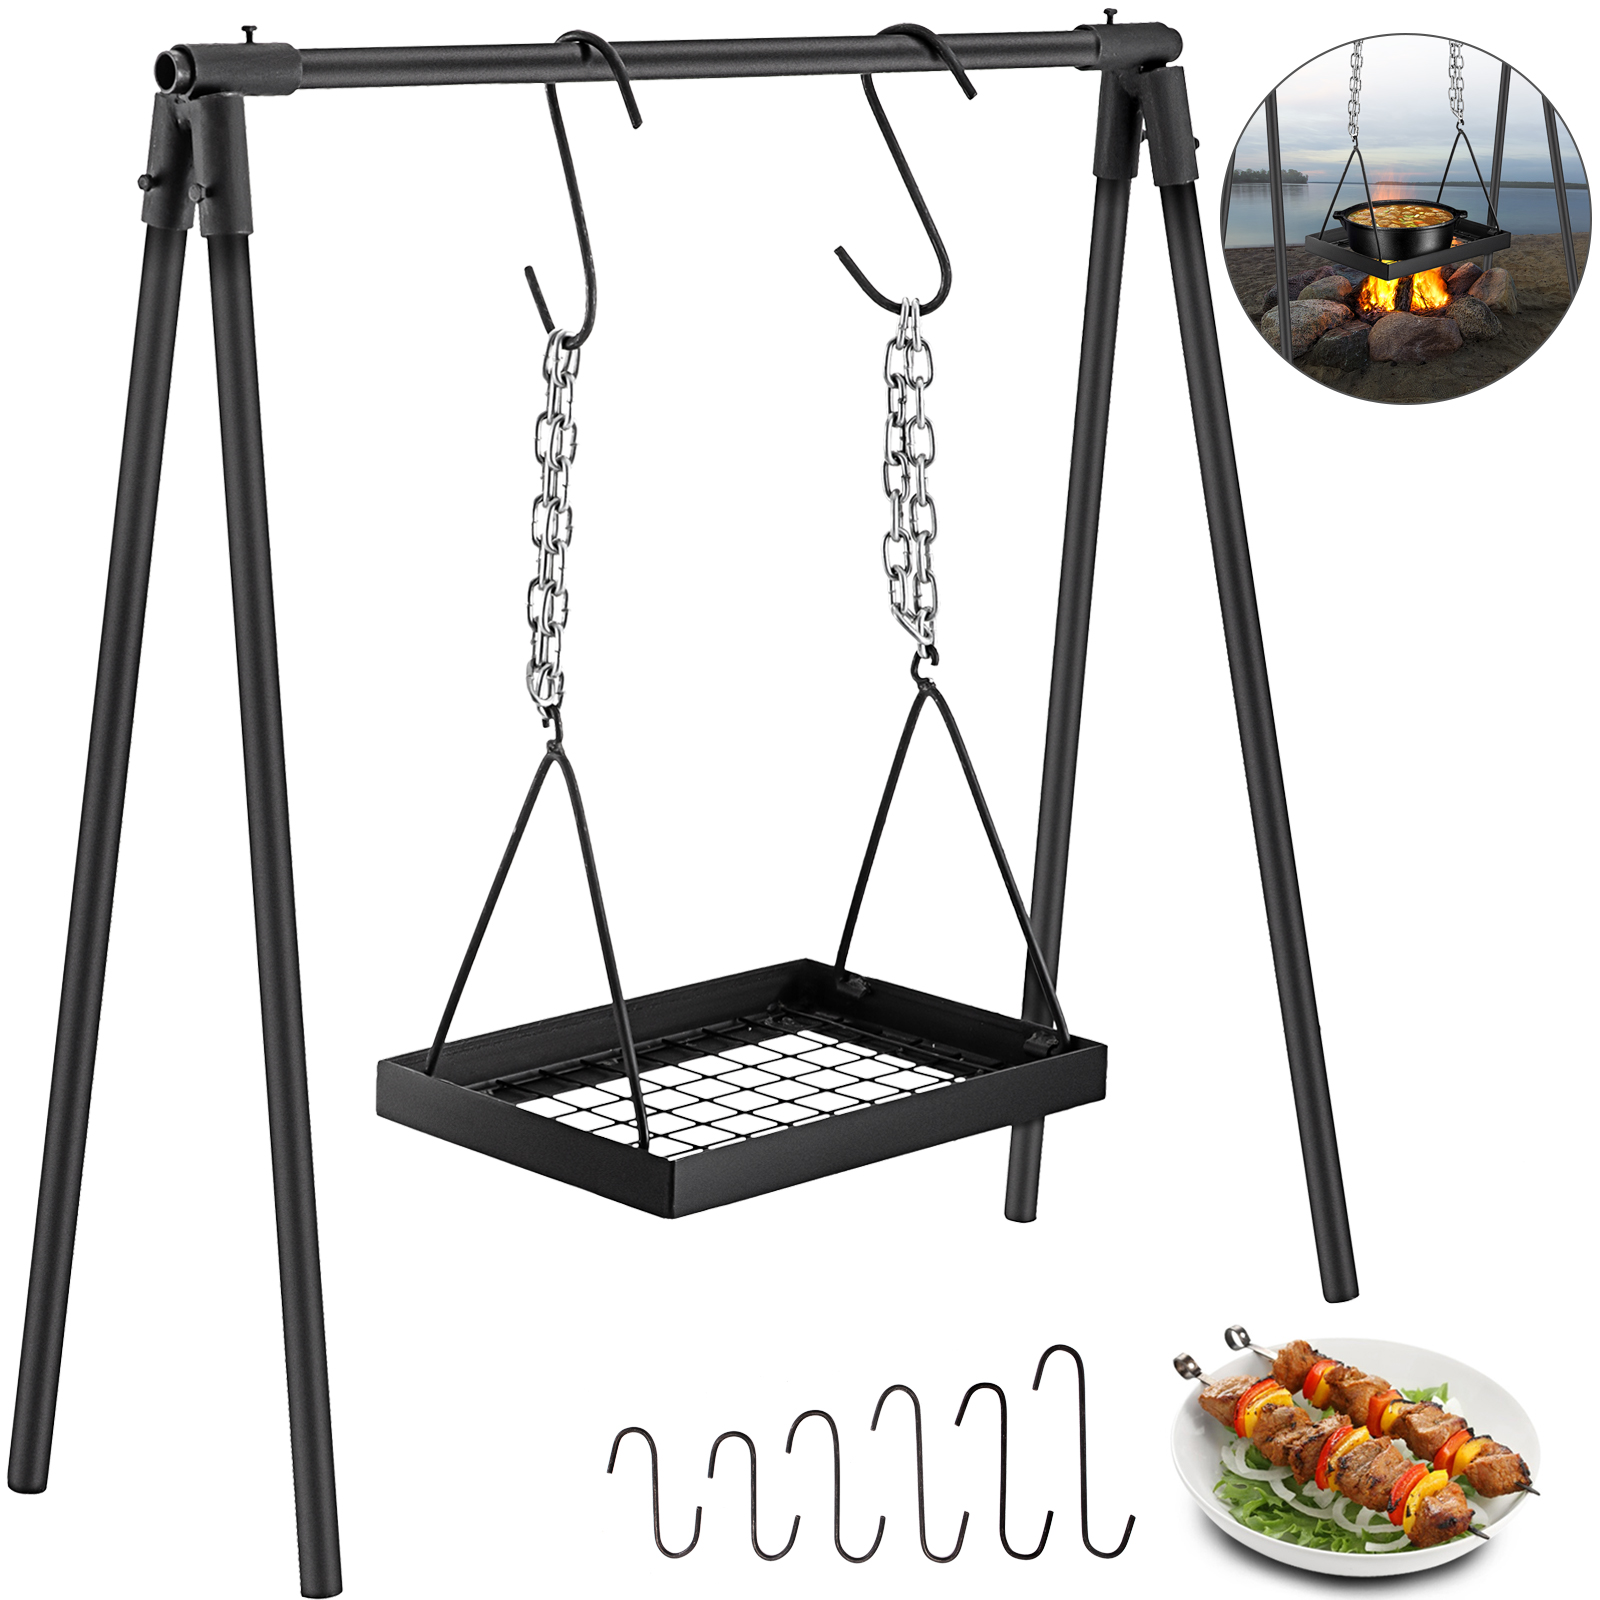 Outdoor Campfire Cooking Equipment Camping Hook Set Heavy-Duty Iron w/ Carry Bag 